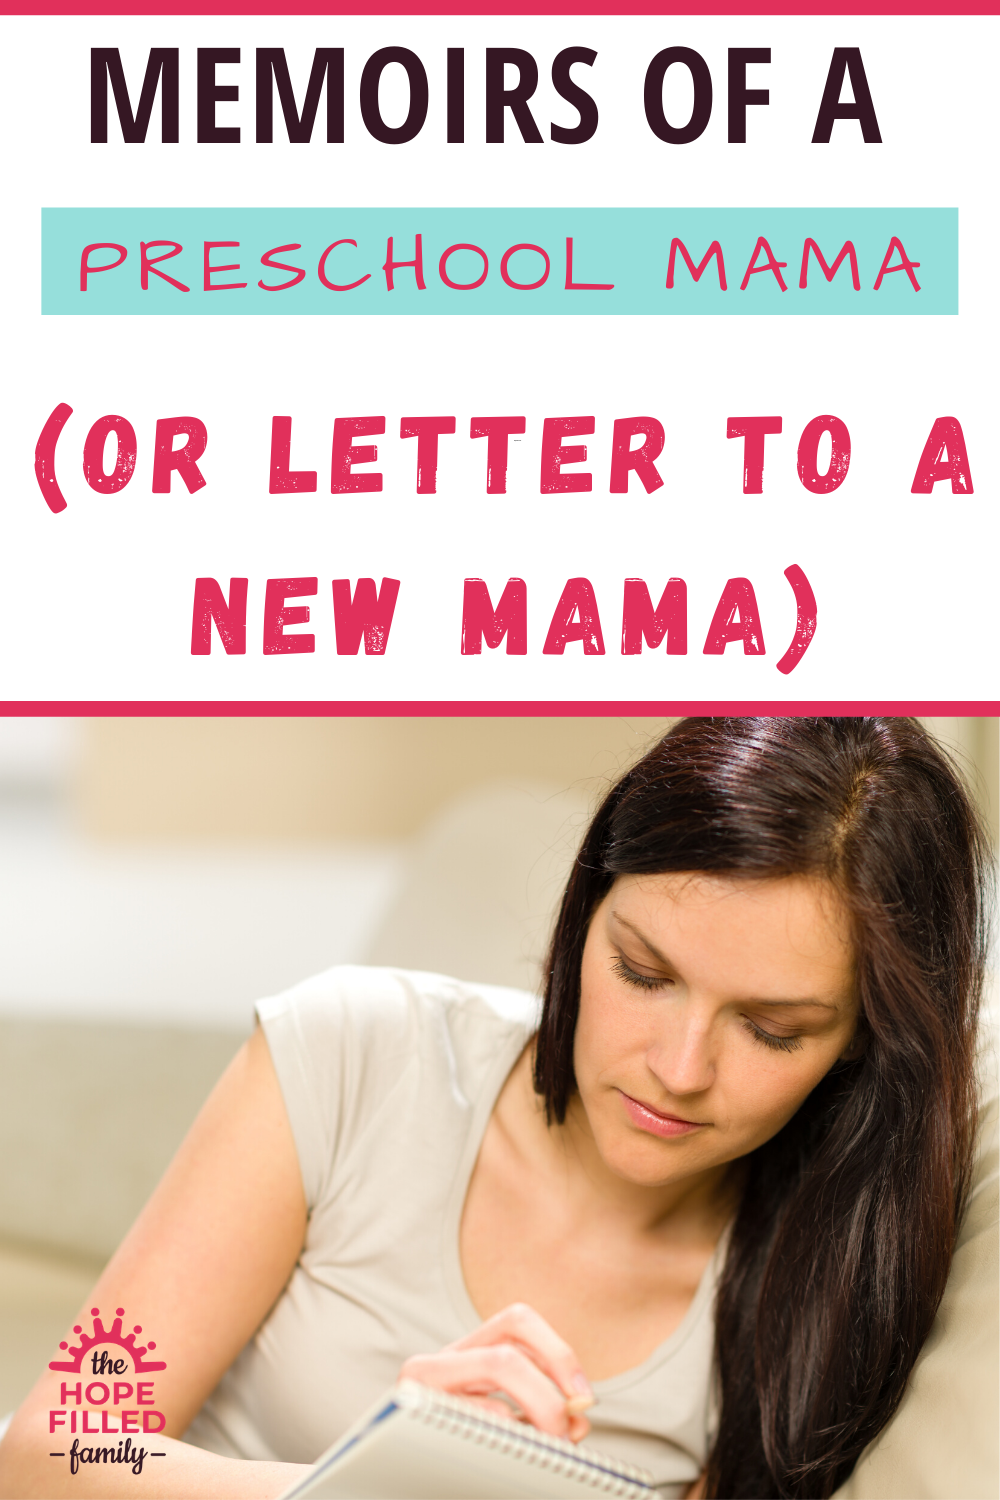 Humorous, relatable, reassuring advice for all new parents, from a fellow mama on the eve of her eldest starting school.